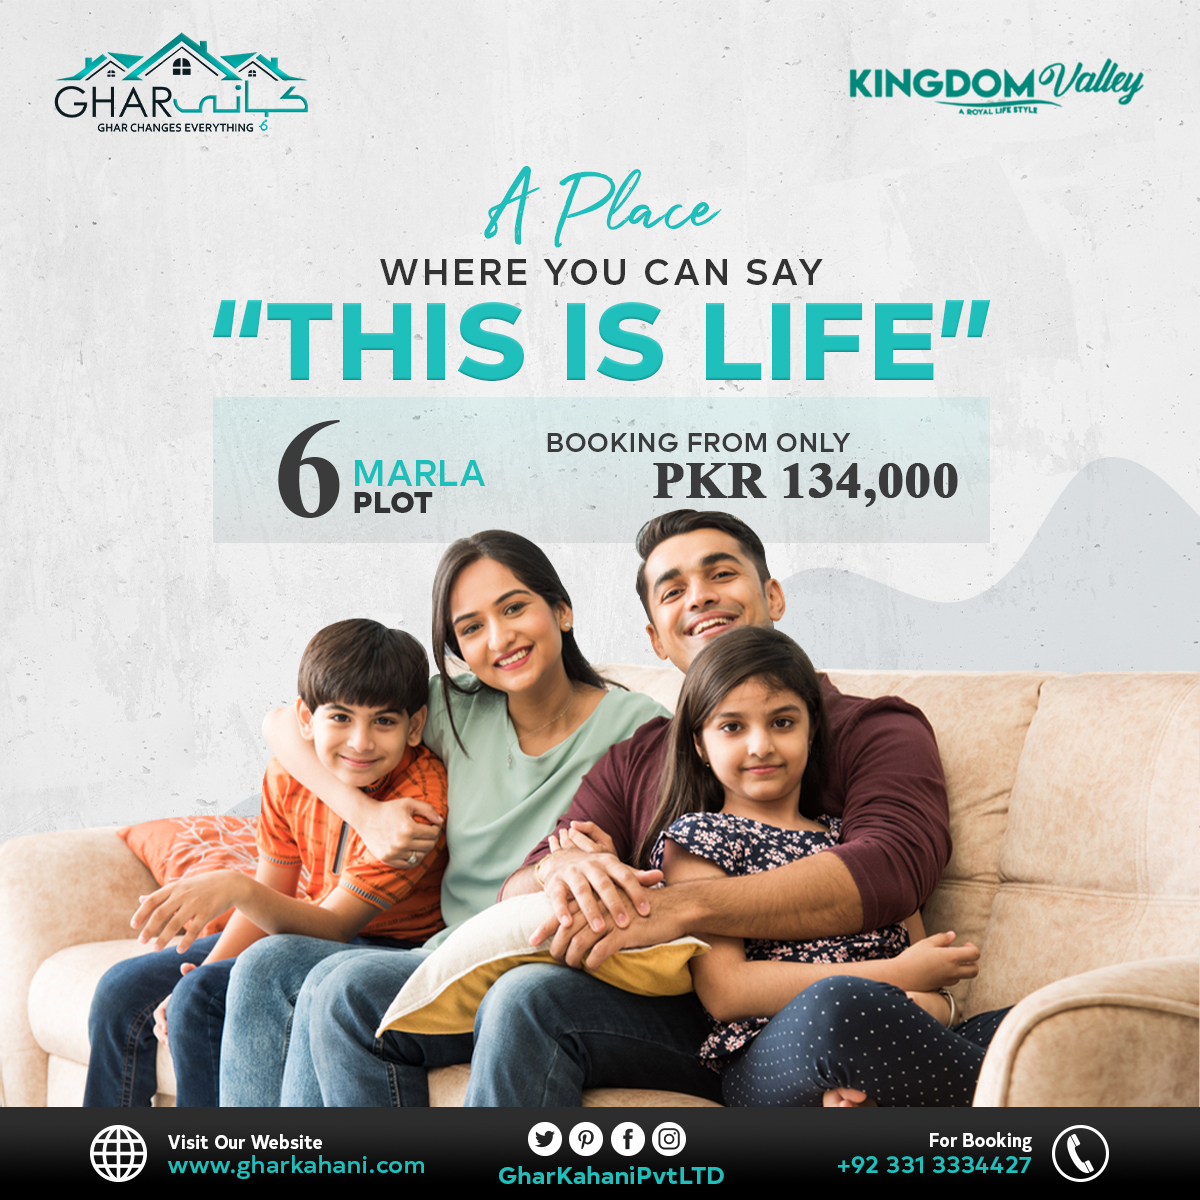 Affordability that comes with convenience!
A beautifully designed community for living a pleasing lifestyle. Book your 6 Marla residential plot on easy monthly installments.

📱 Contact: 0331-3334427
🌐 Visit us: gharkahani.com/kingdom-valley…

#GharKahani #KingdomValley #ExecutiveBlock